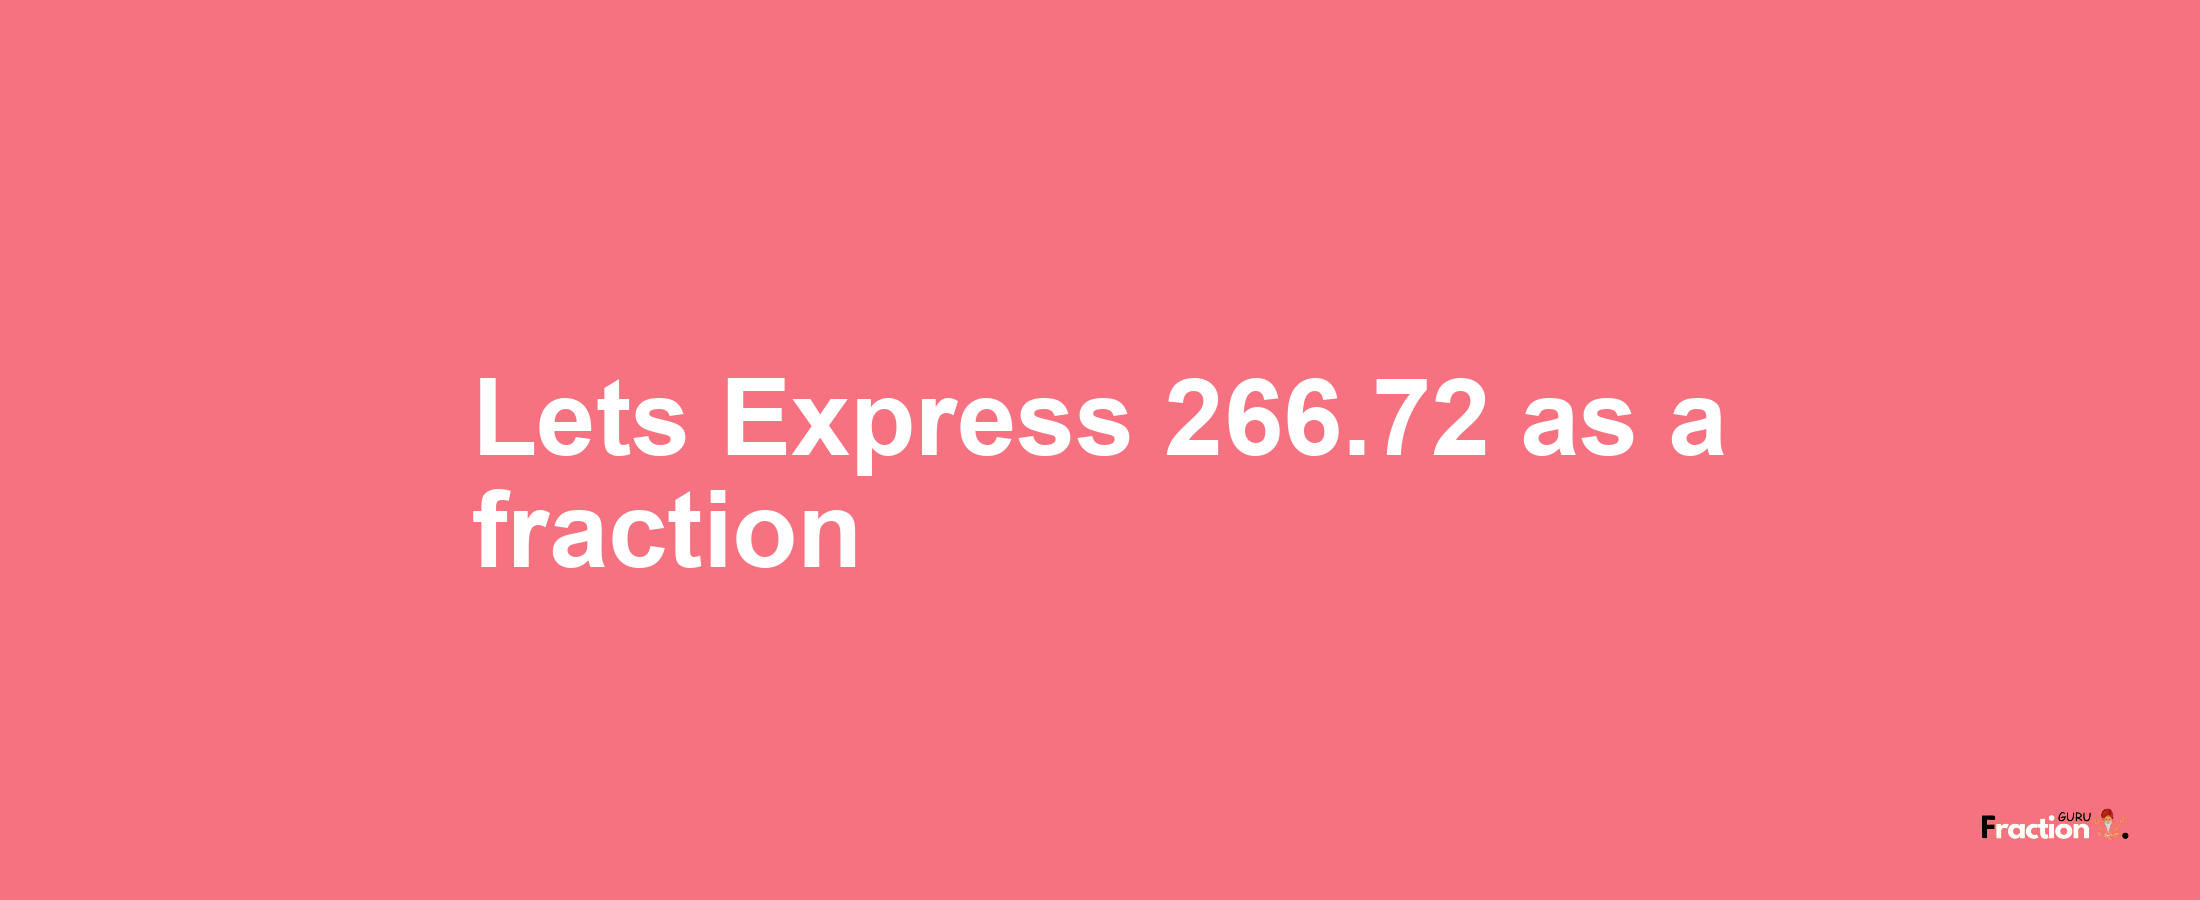 Lets Express 266.72 as afraction